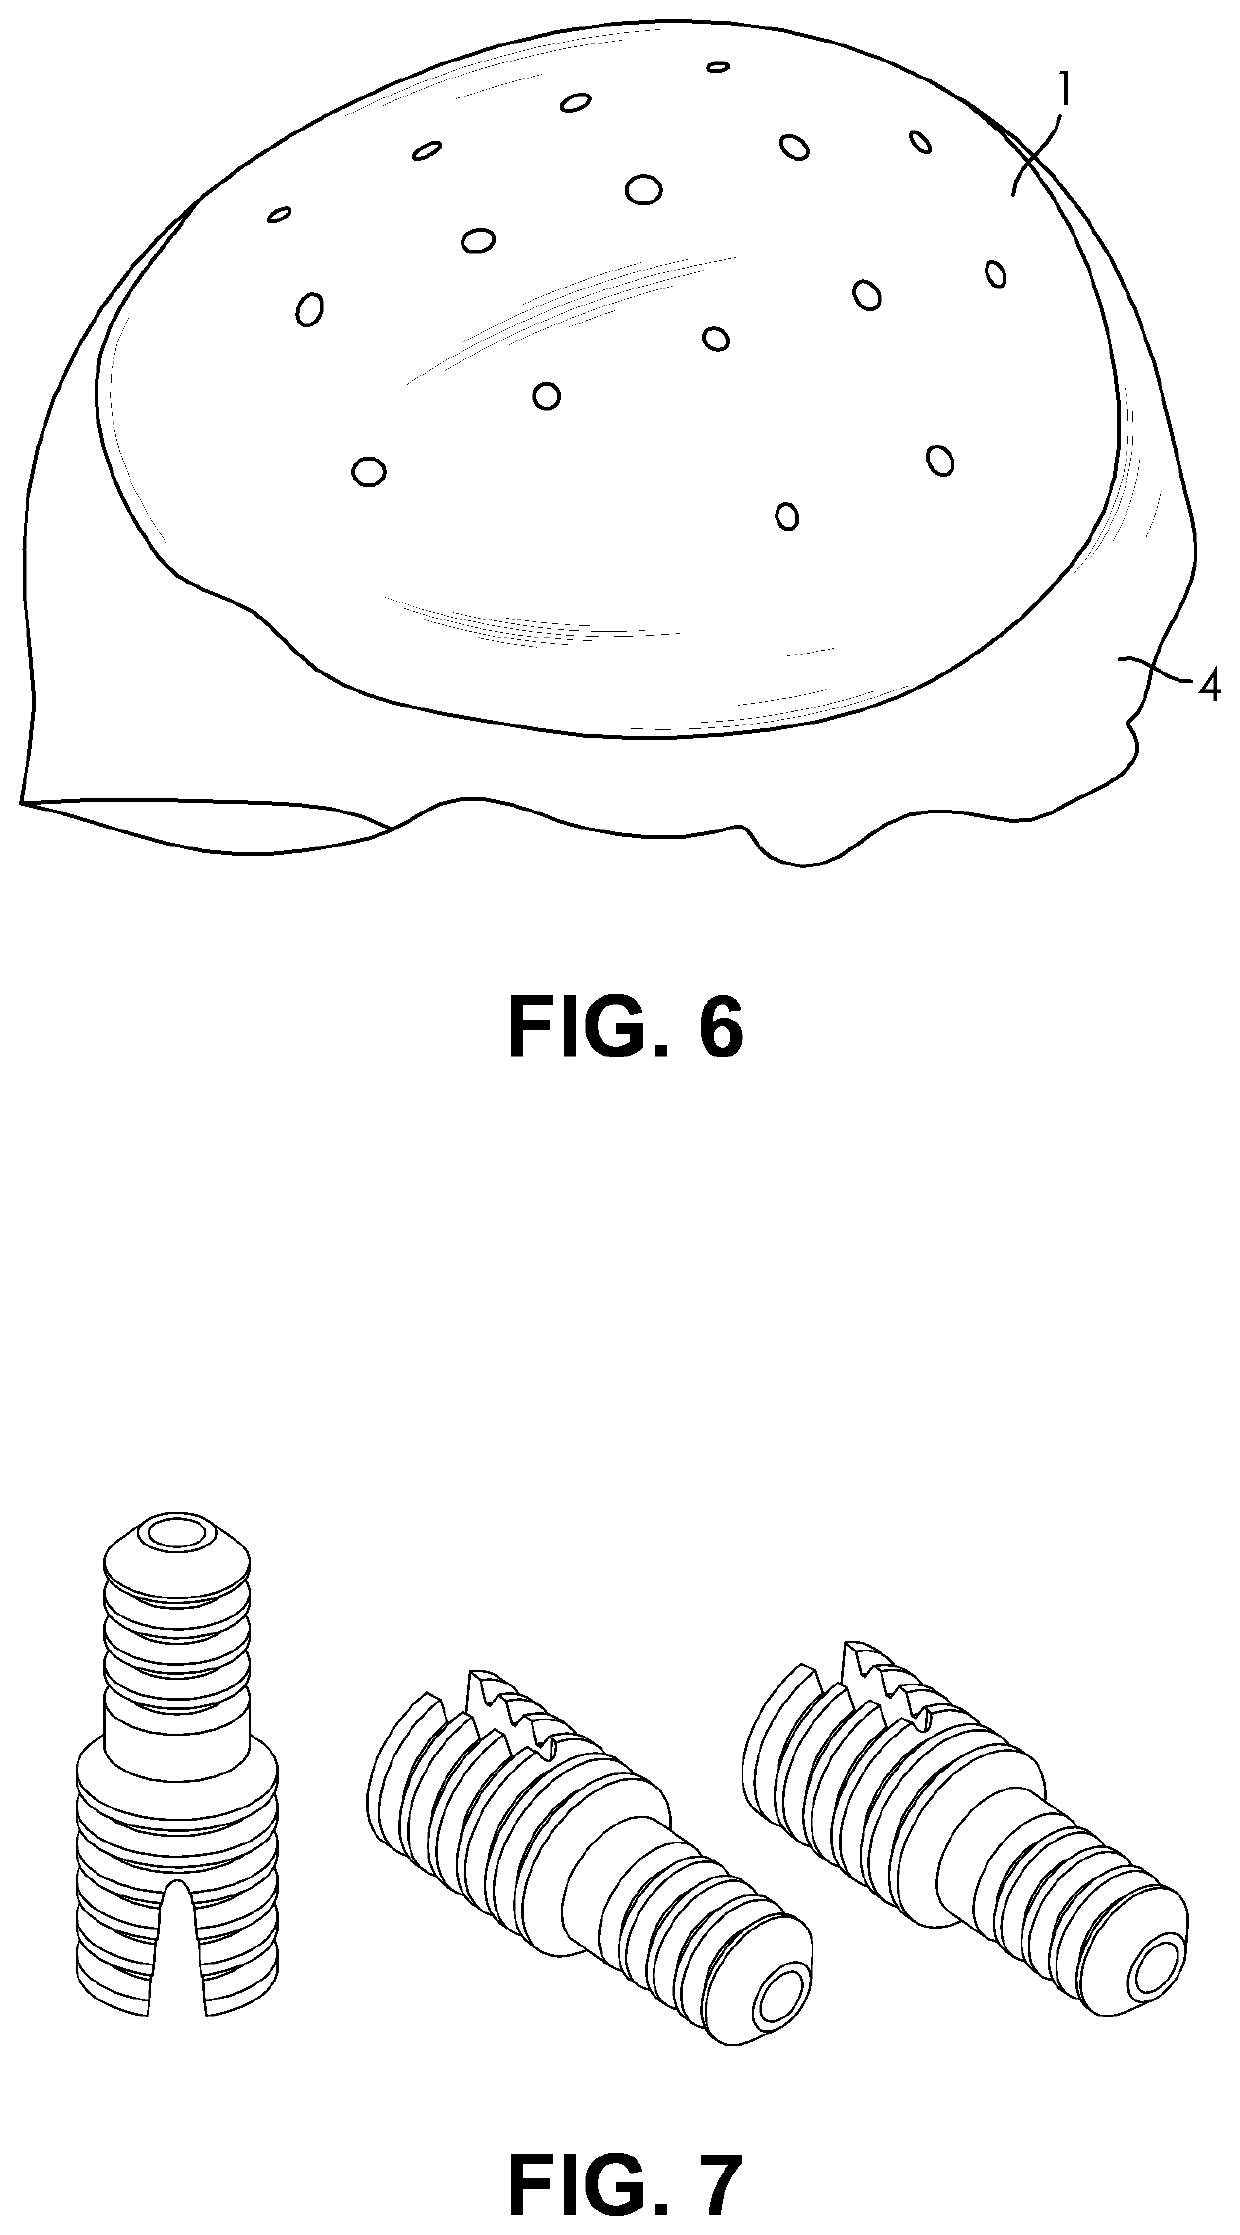 Customized porous supracrestal implant and materials and methods forming them